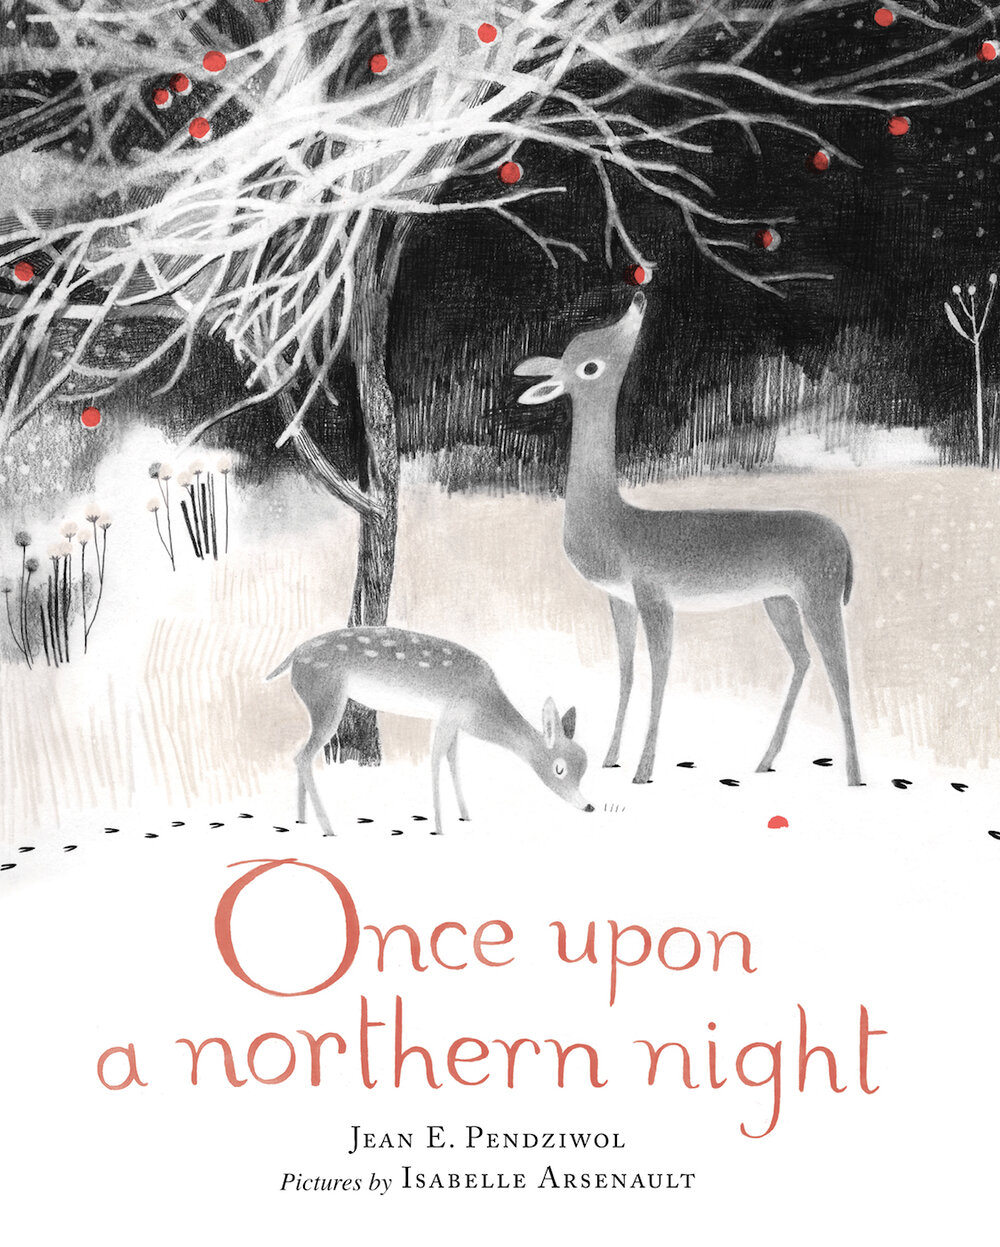 Northern night cover small.jpg